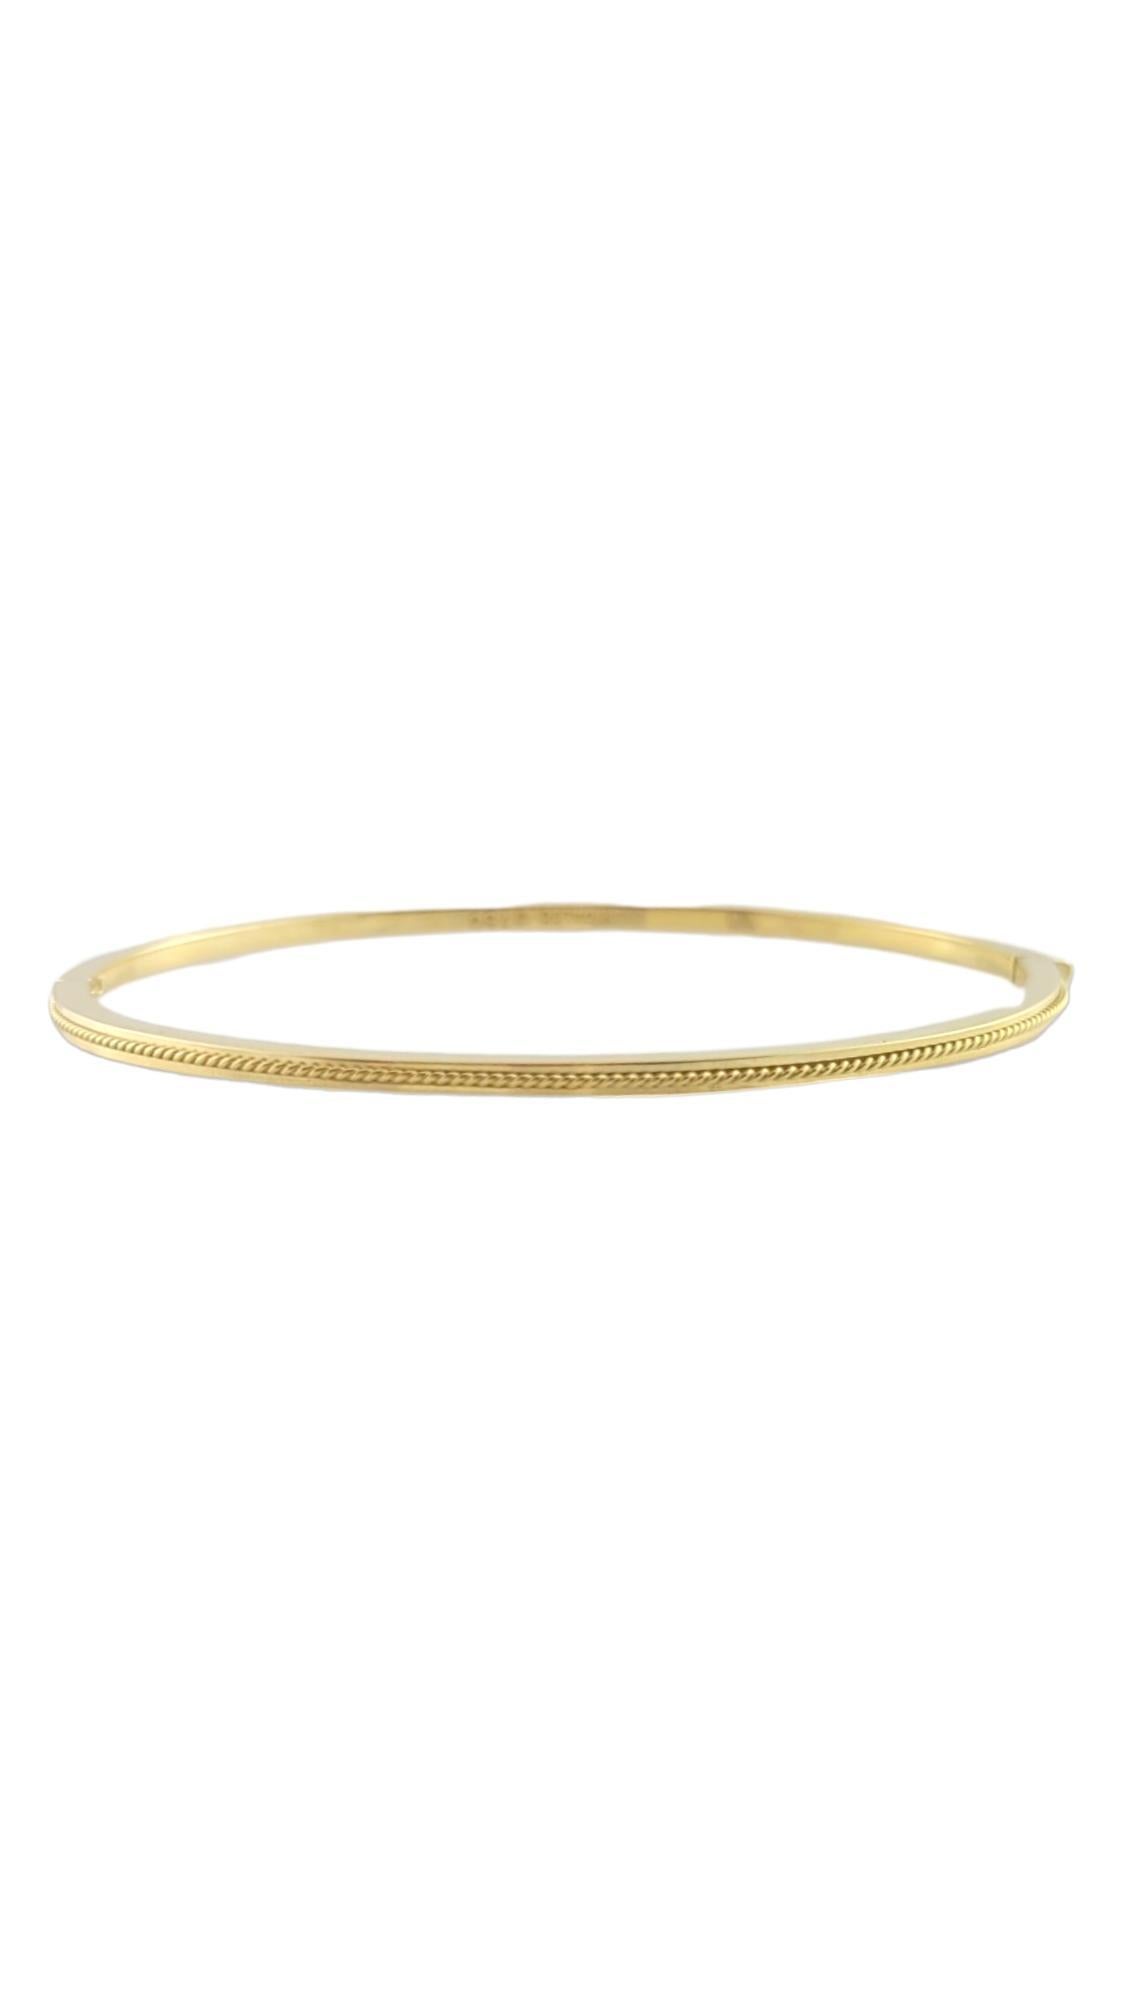 Hidalgo 18K Yellow Gold Oval Rope Accented Bangle Bracelet #16506 In Good Condition For Sale In Washington Depot, CT